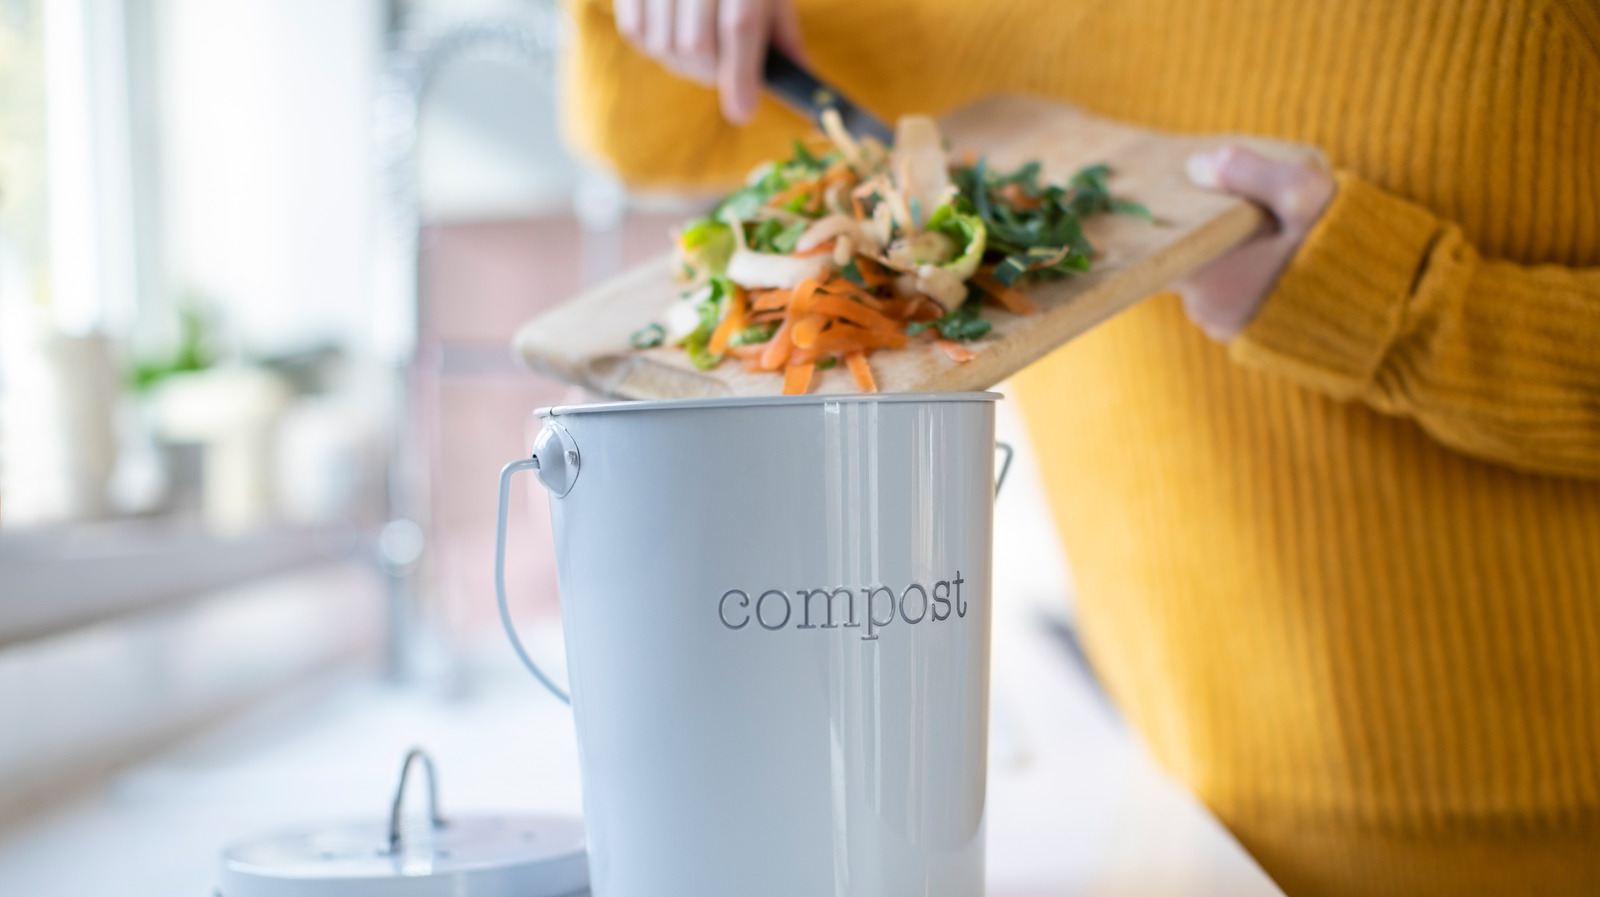 https://www.housedigest.com/img/gallery/the-5-best-compost-bins-you-need-in-your-kitchen/l-intro-1667309752.jpg